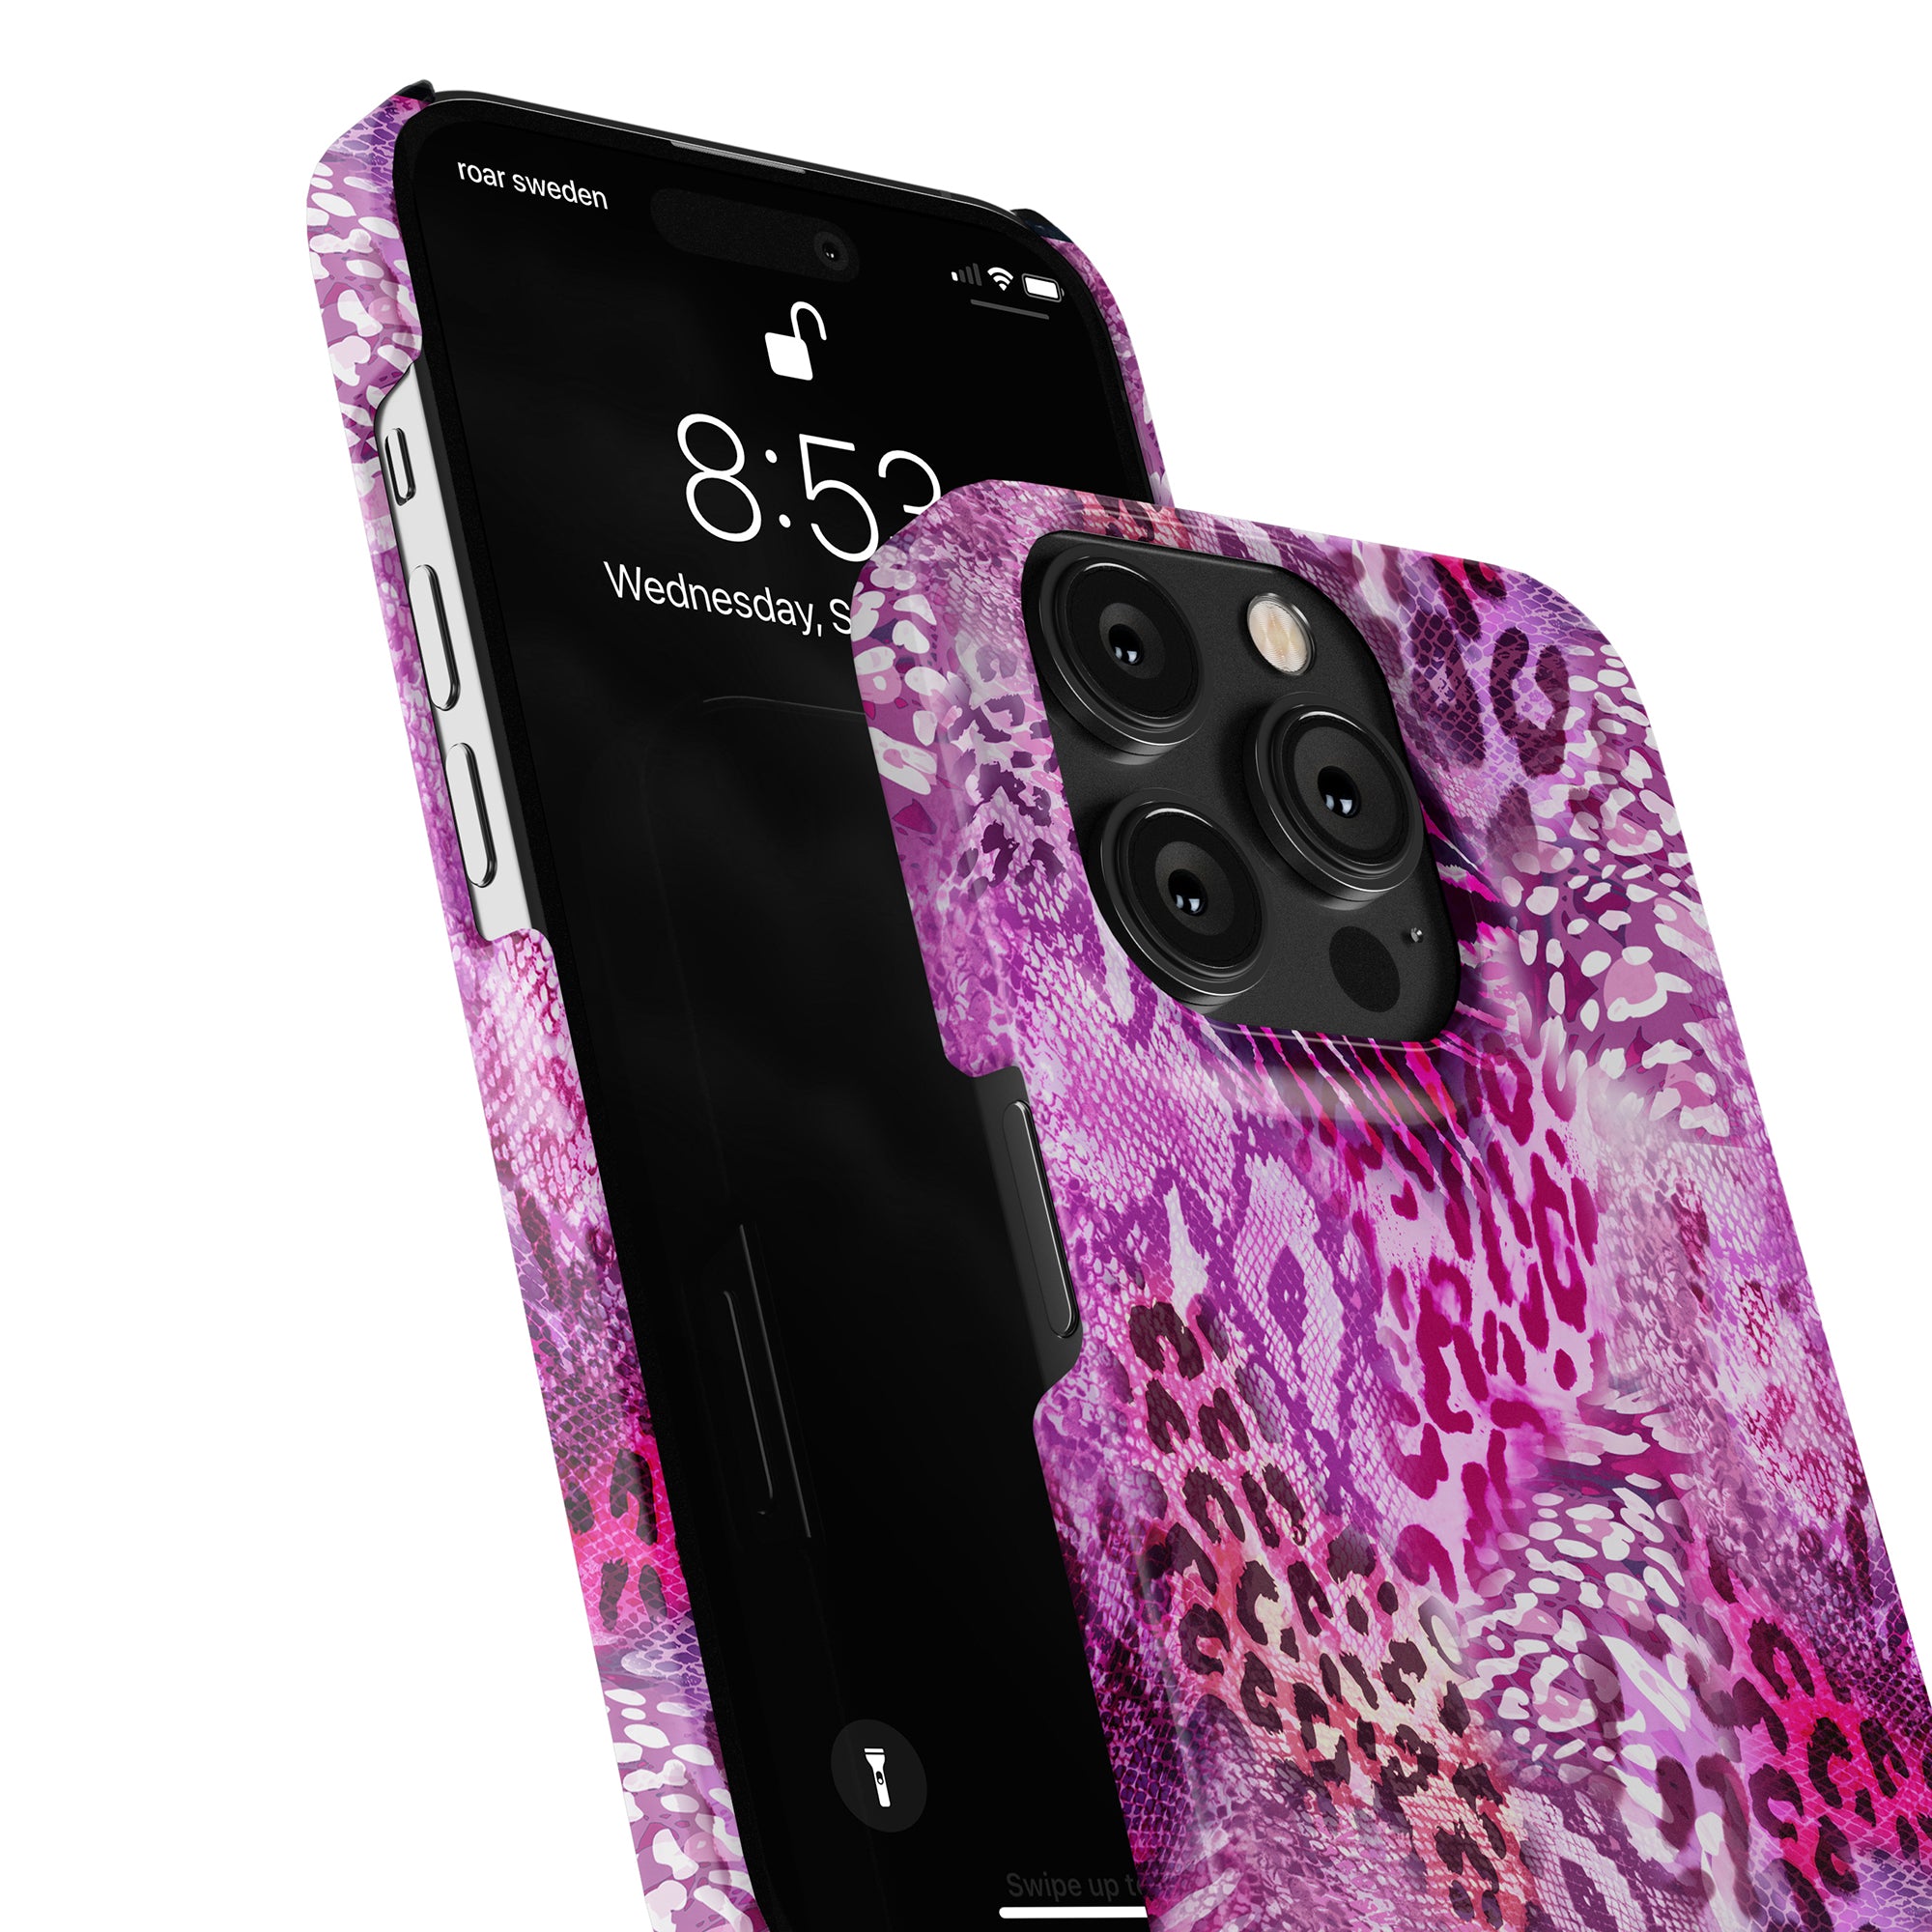 A Swirl Leopard - Slim case for the iPhone 11 Pro.